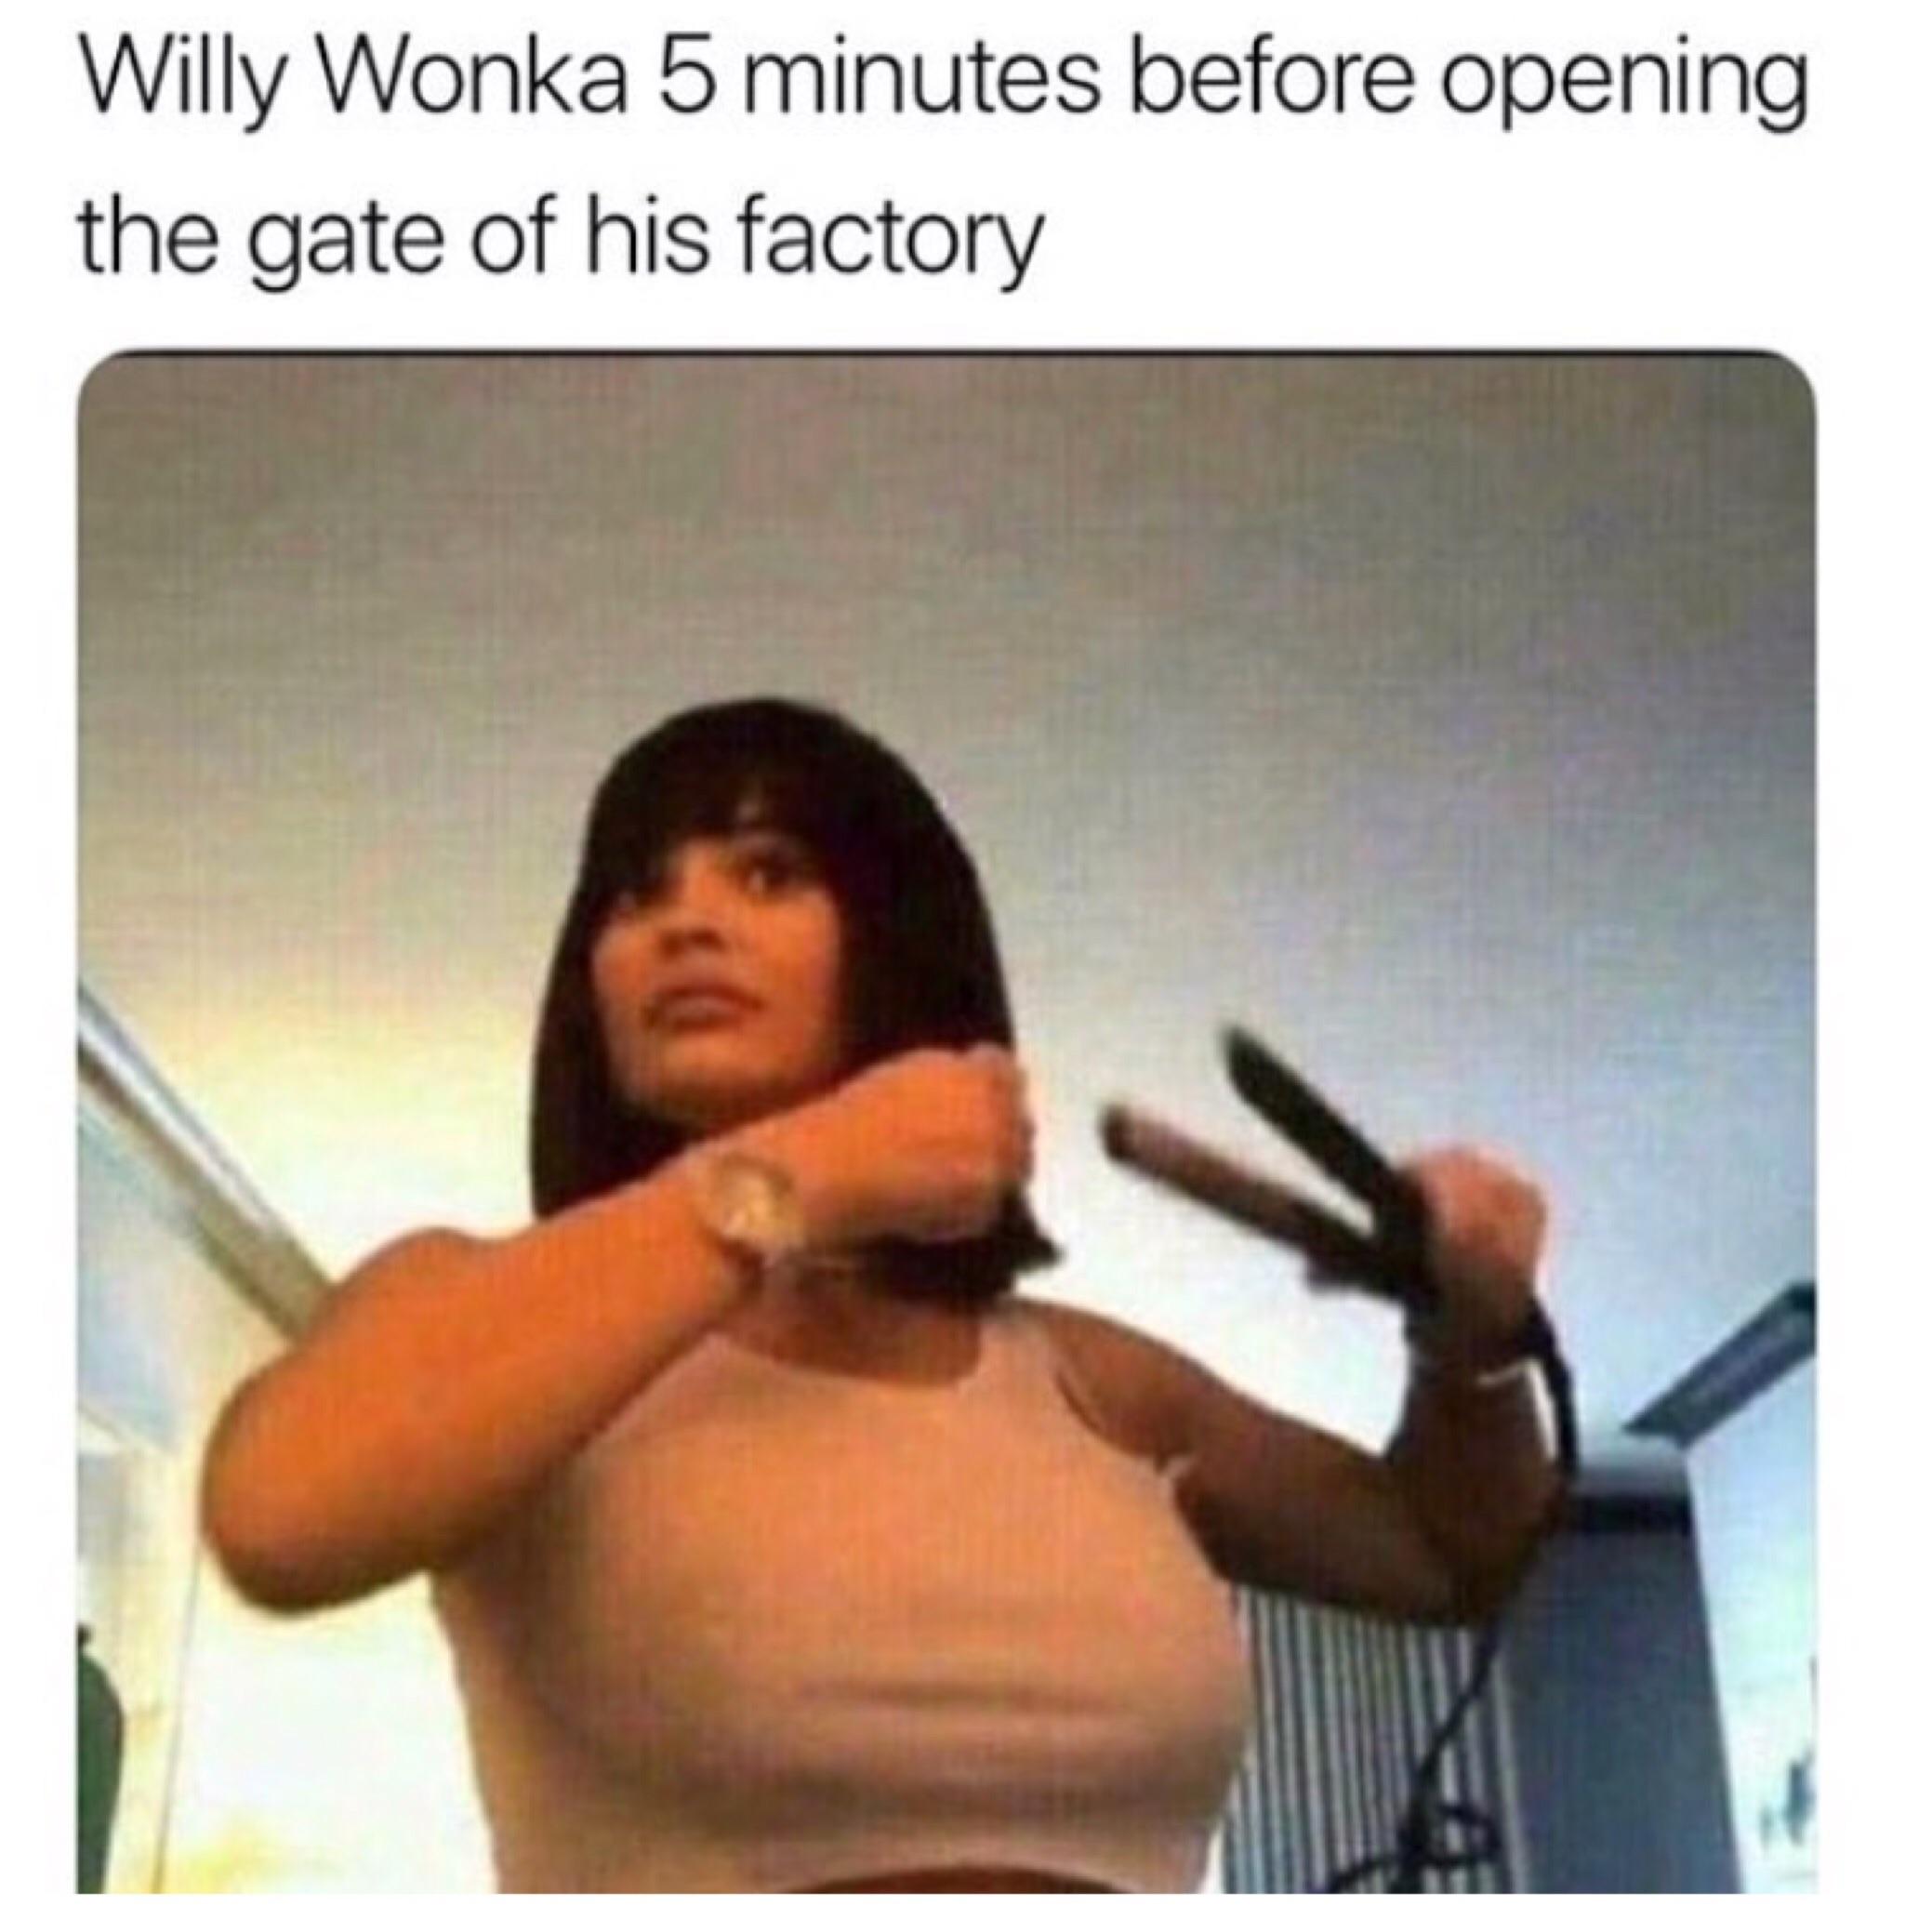 memes - willy wonka 5 minutes before opening - Willy Wonka 5 minutes before opening the gate of his factory